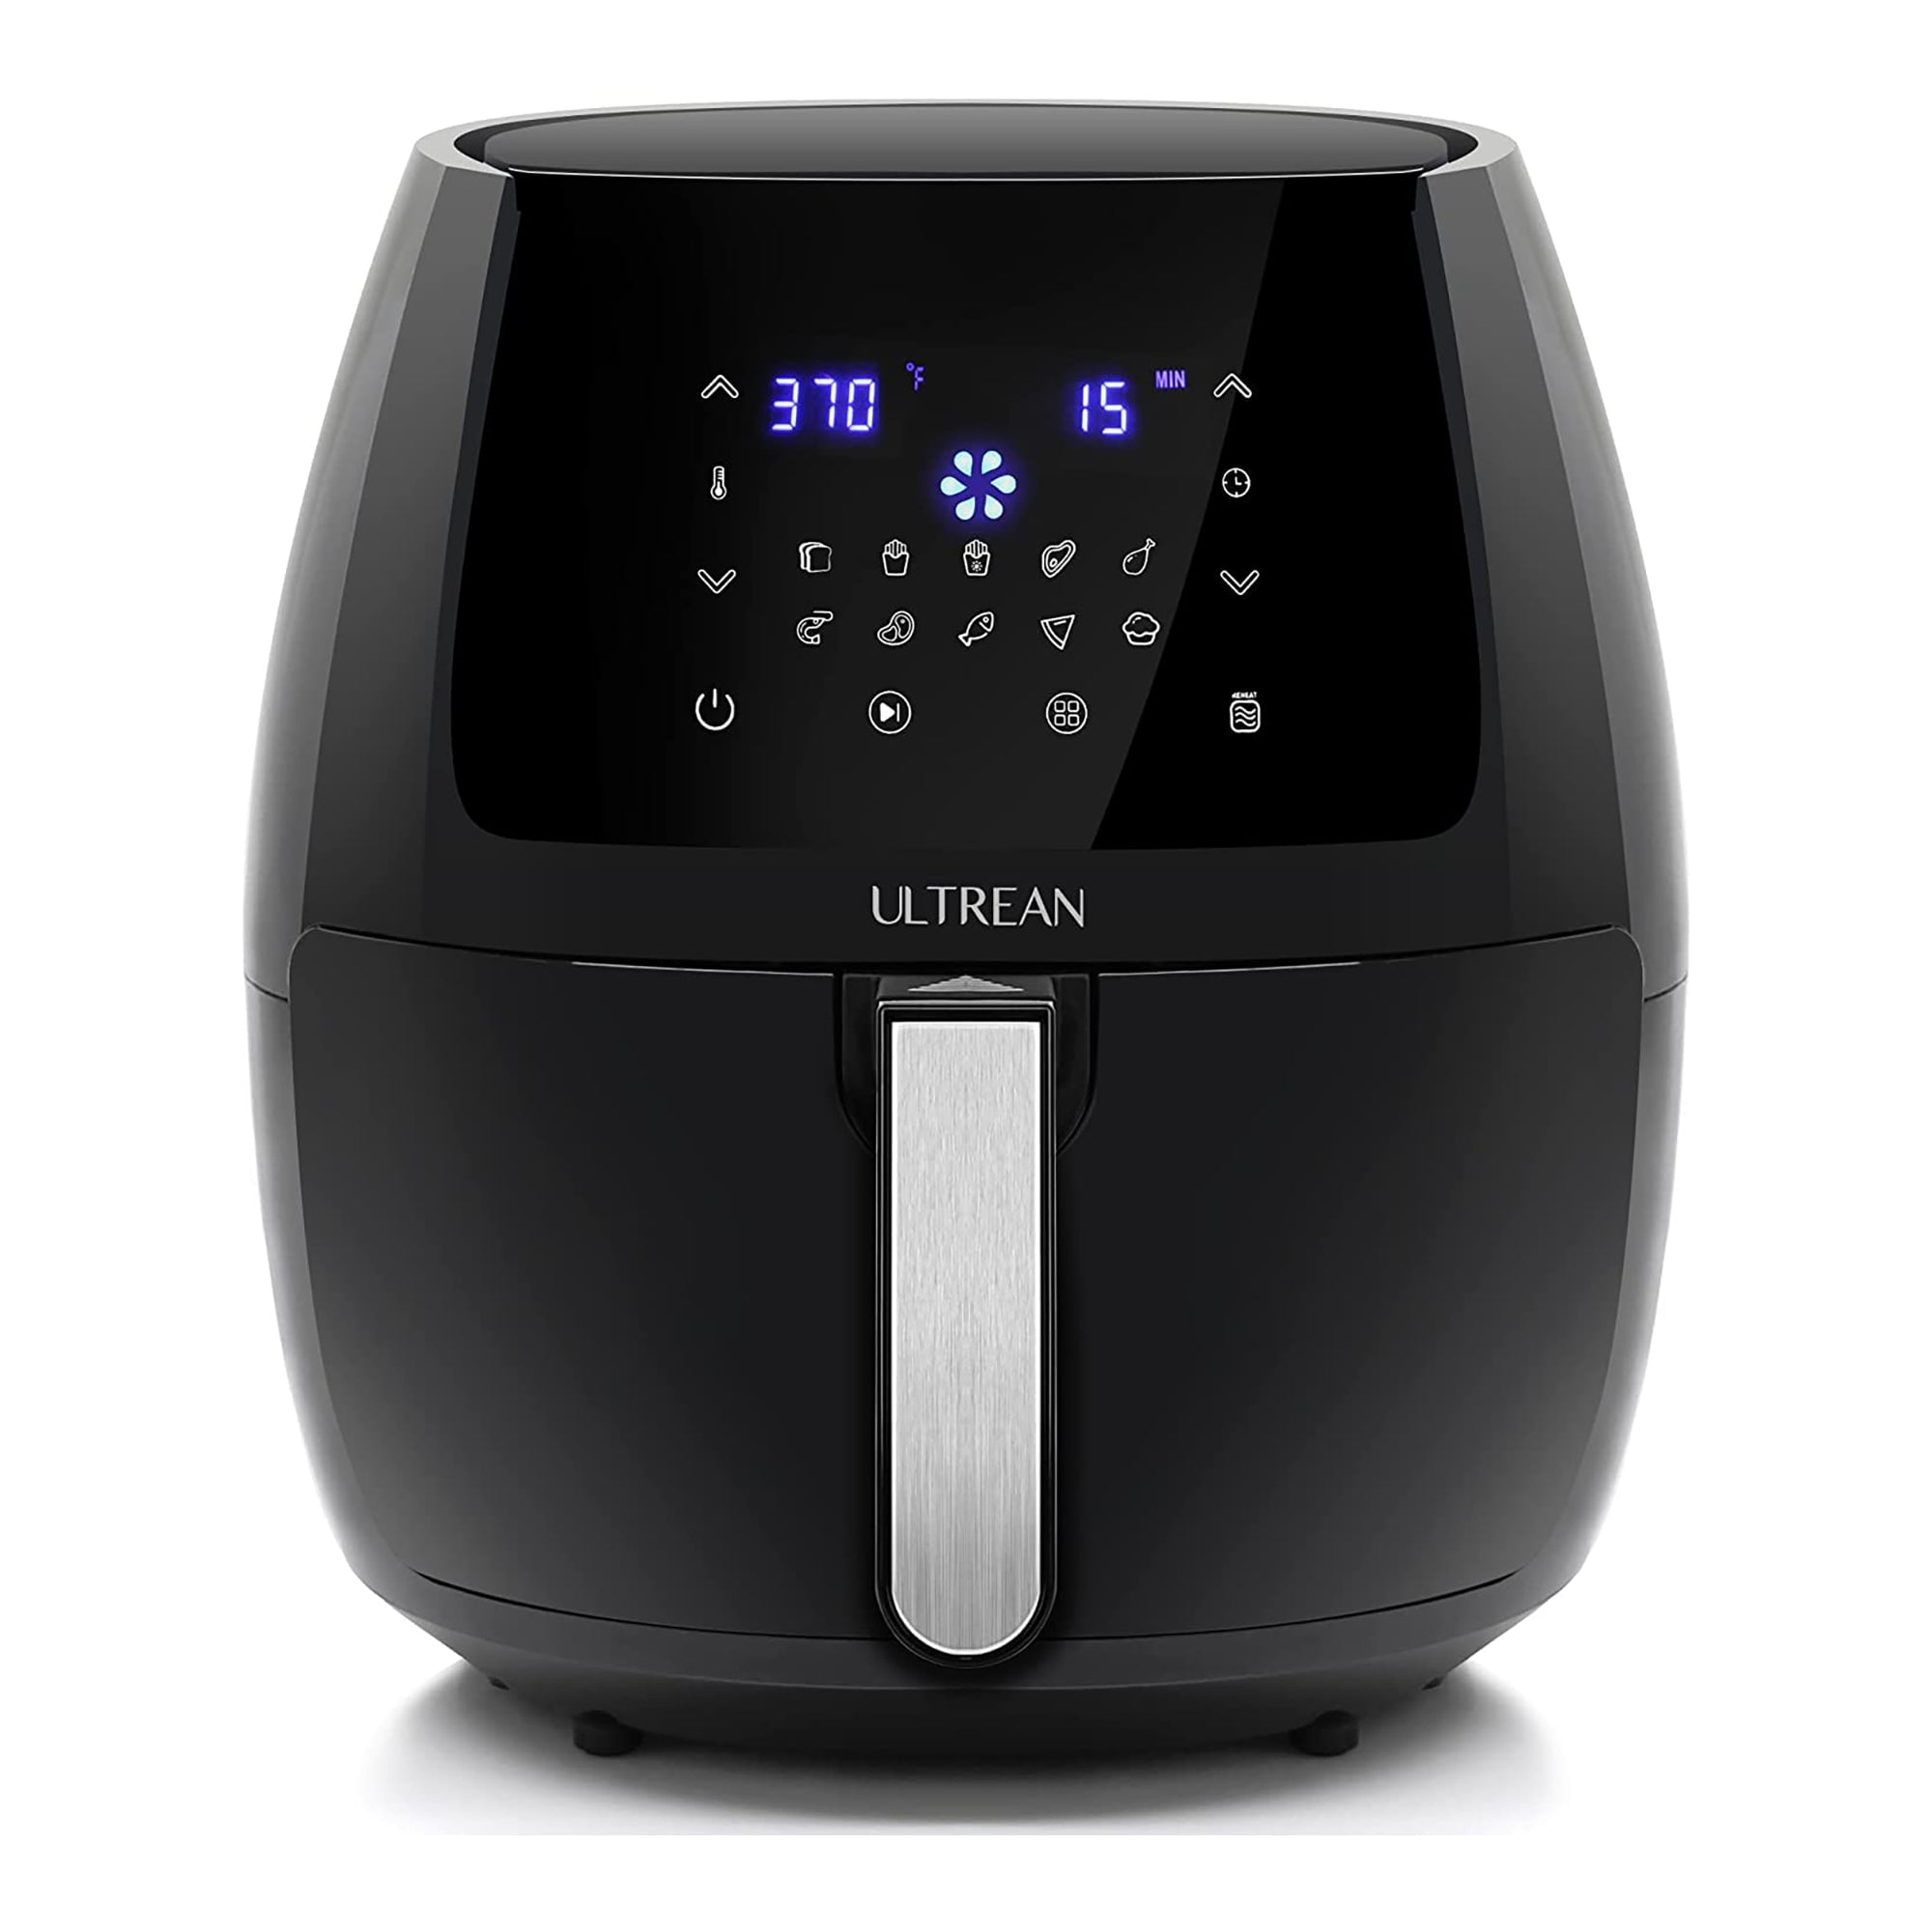 ZENY Burgundy 7-in-1 Touch Screen Control Electric Air Fryer 1500W 7 Presets 3.7QT W/Recipes & CookBook 